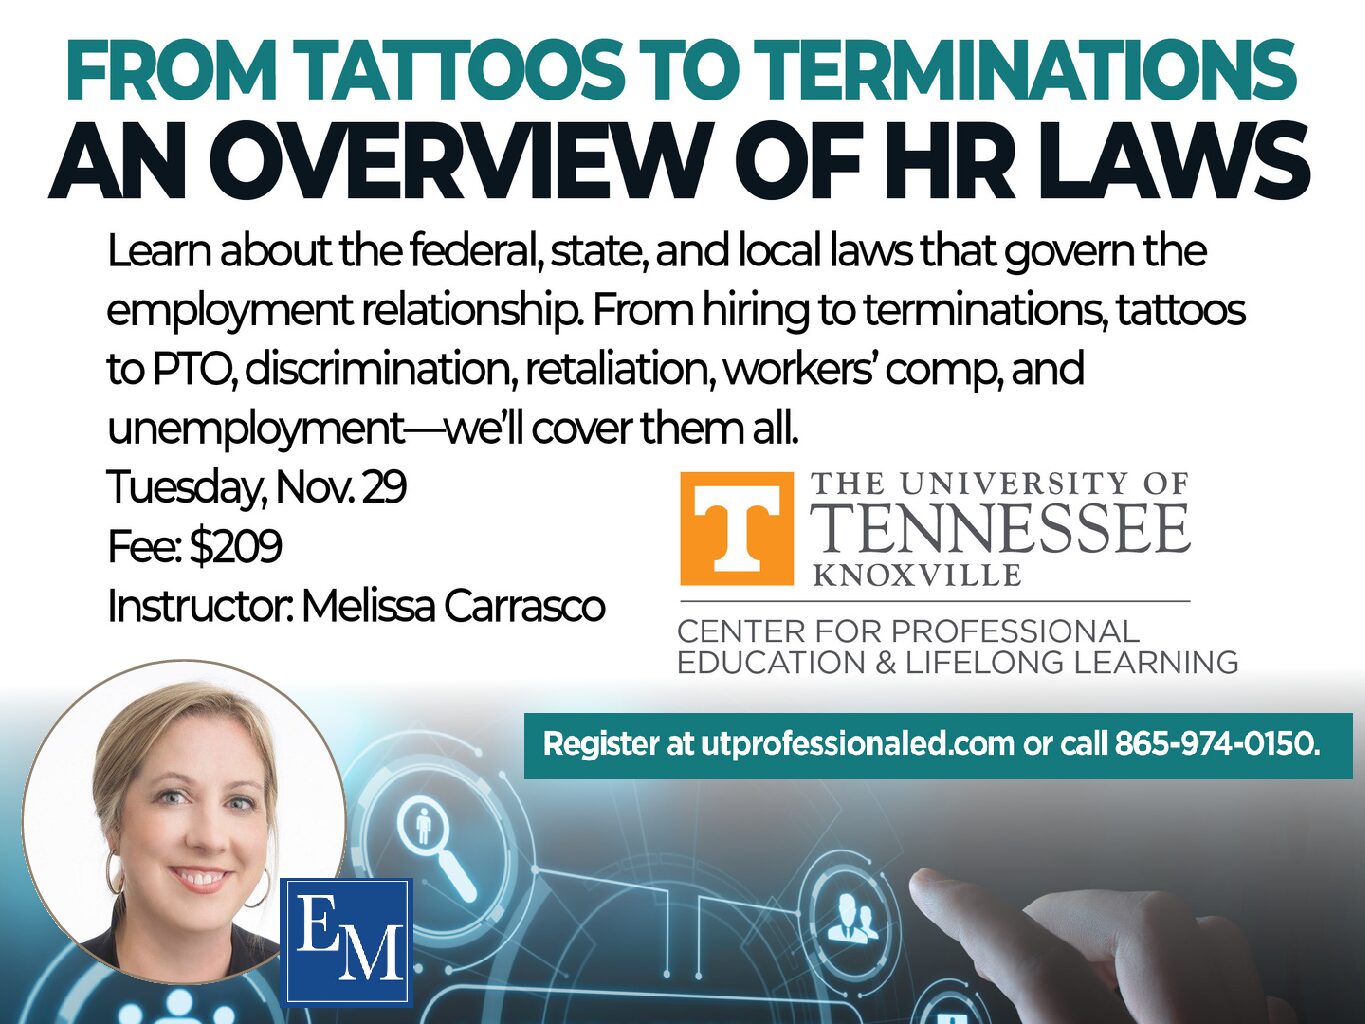 Melissa Carrasco To Teach: From Tattoos to Terminations An Overview of HR Laws